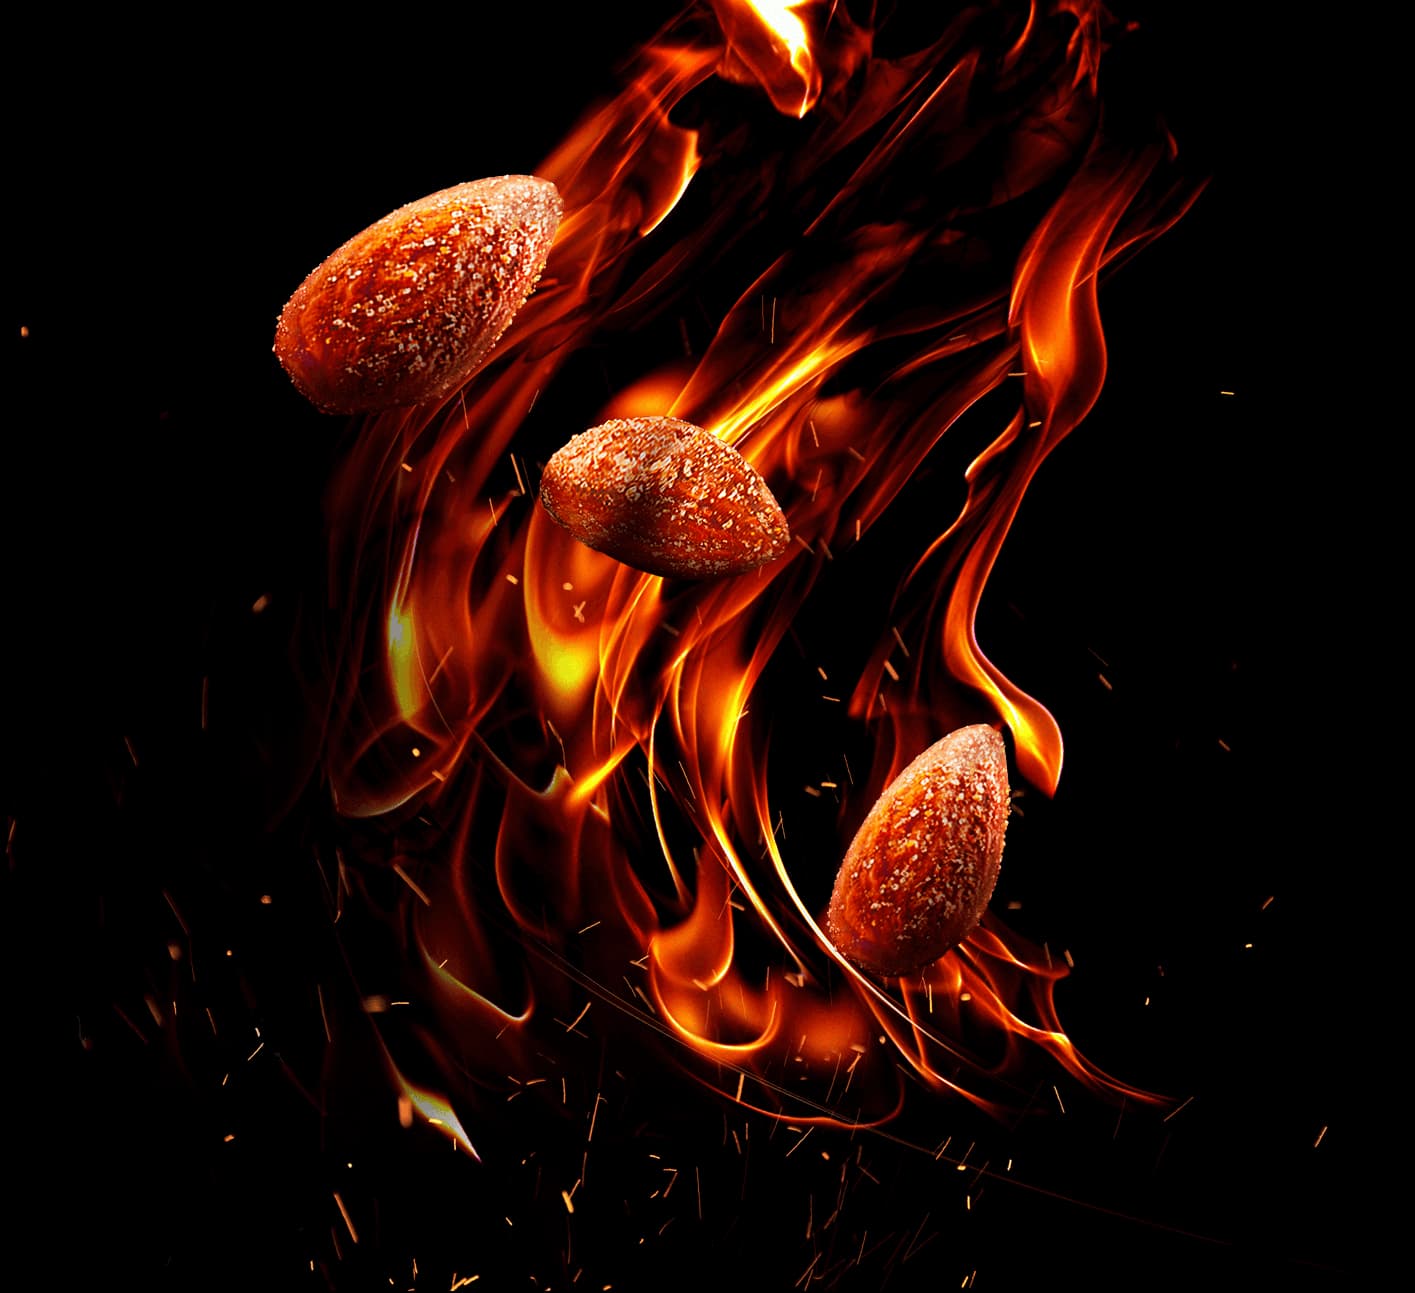 Almonds in Flames